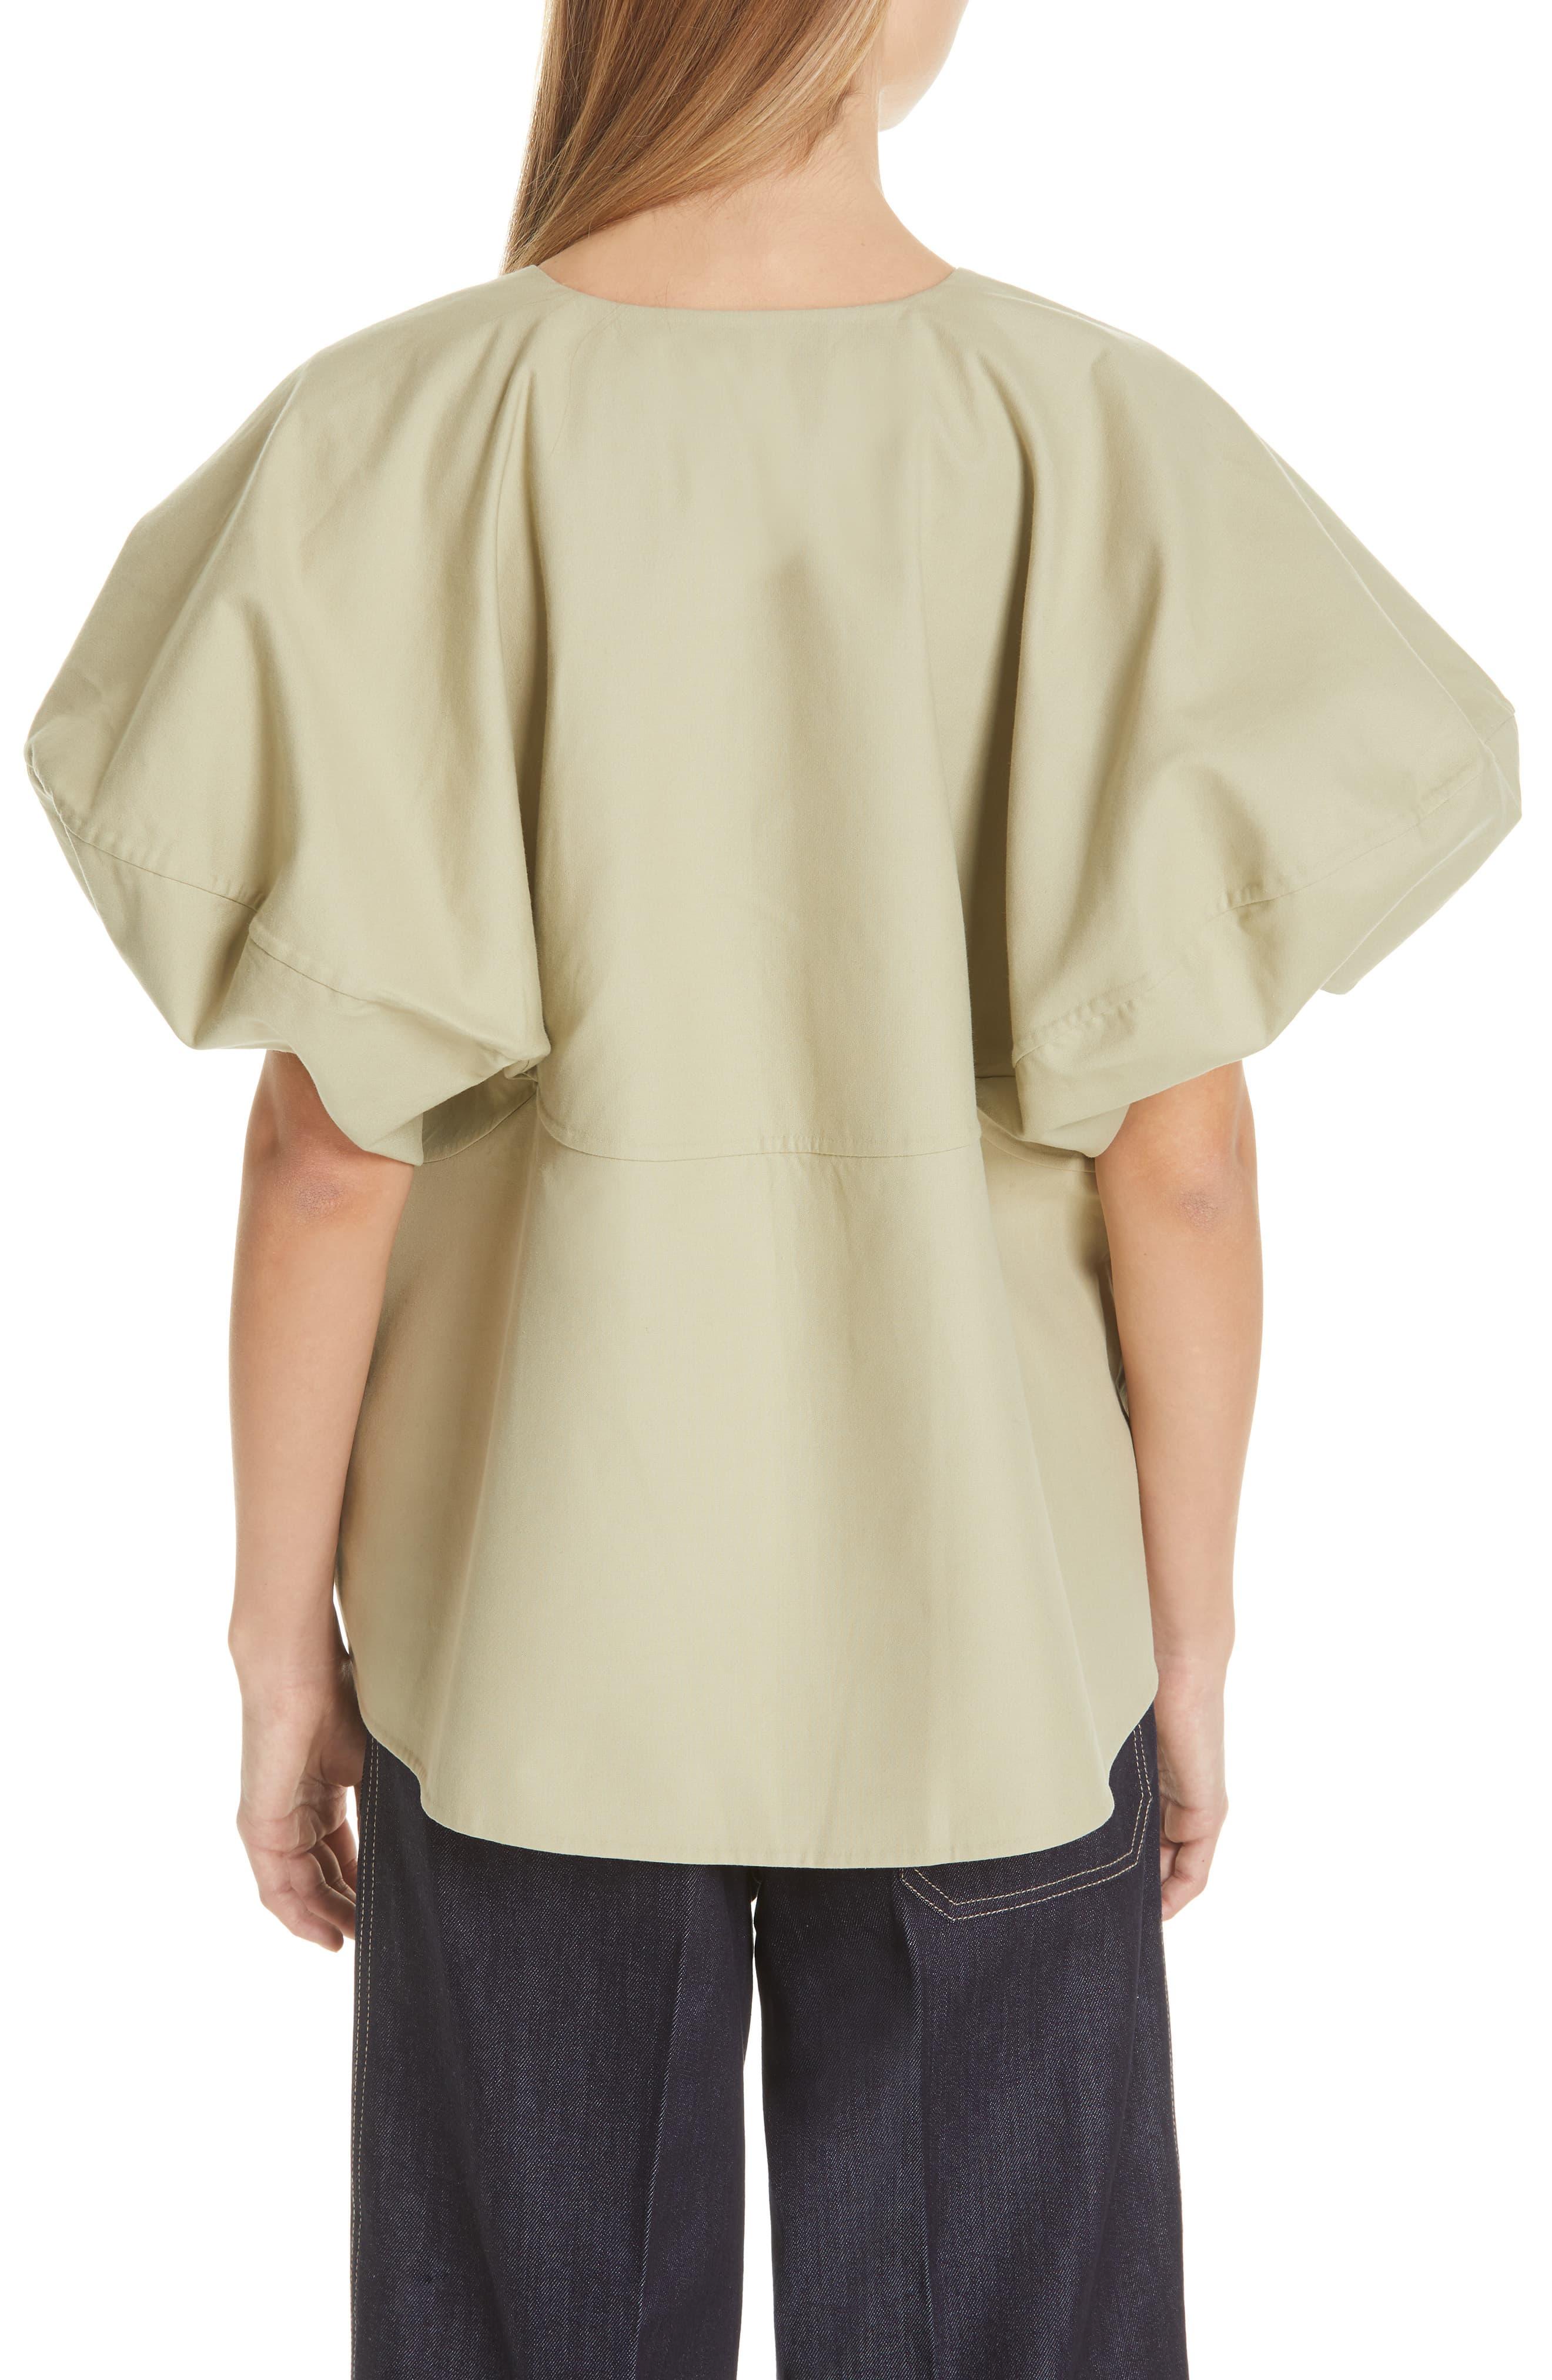 Sofie D'Hoore Cotton Clock Puff Sleeve Jacket in Natural - Lyst